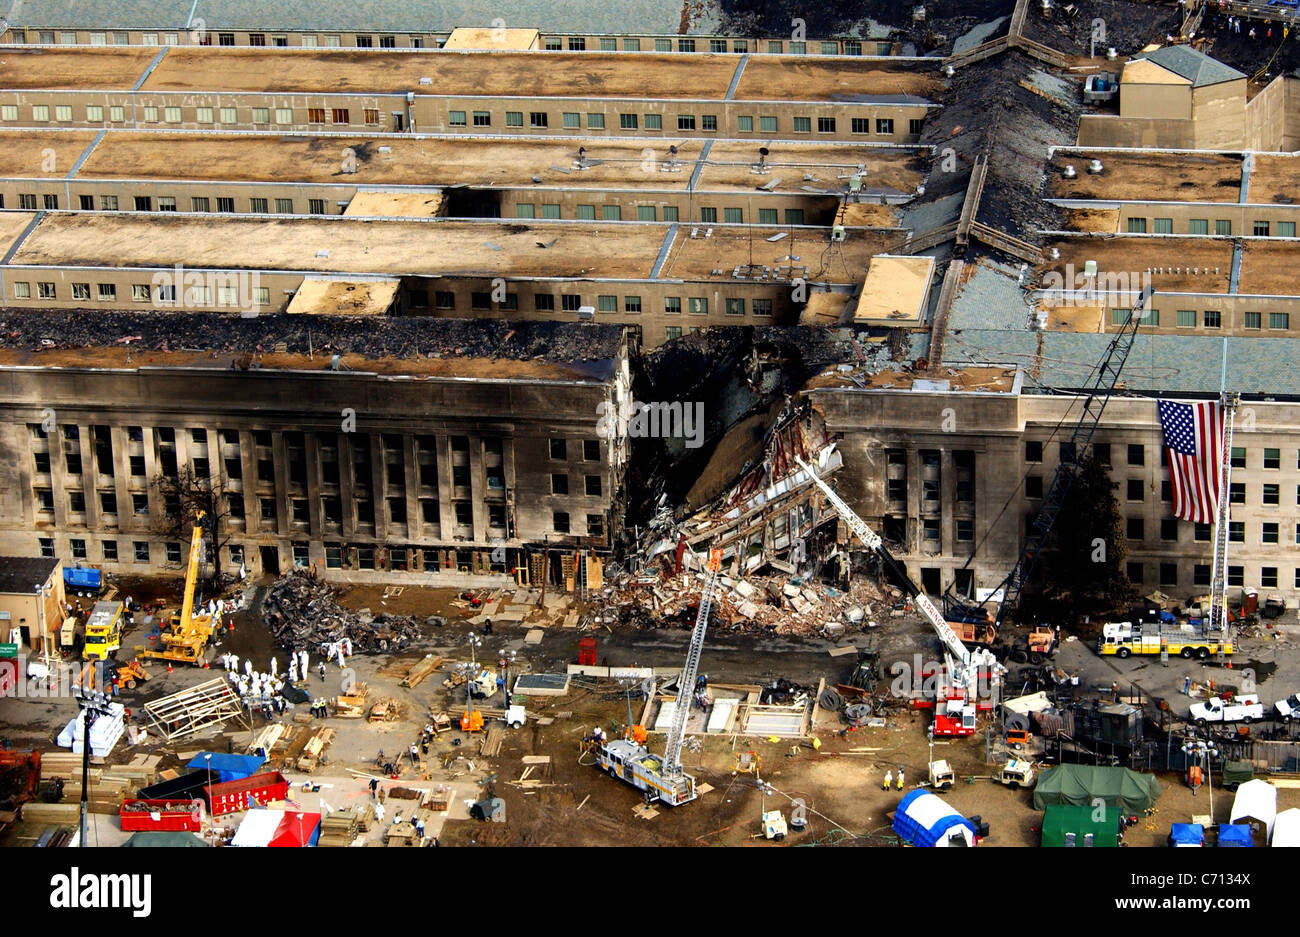 Aerial view of the Pentagon Building located in Washington, District of Columbia (DC), showing emergency crews responding to the destruction caused when a high-jacked commercial jetliner crashed into the southwest corner of the building, during the 9/11 terrorists attacks. Stock Photo